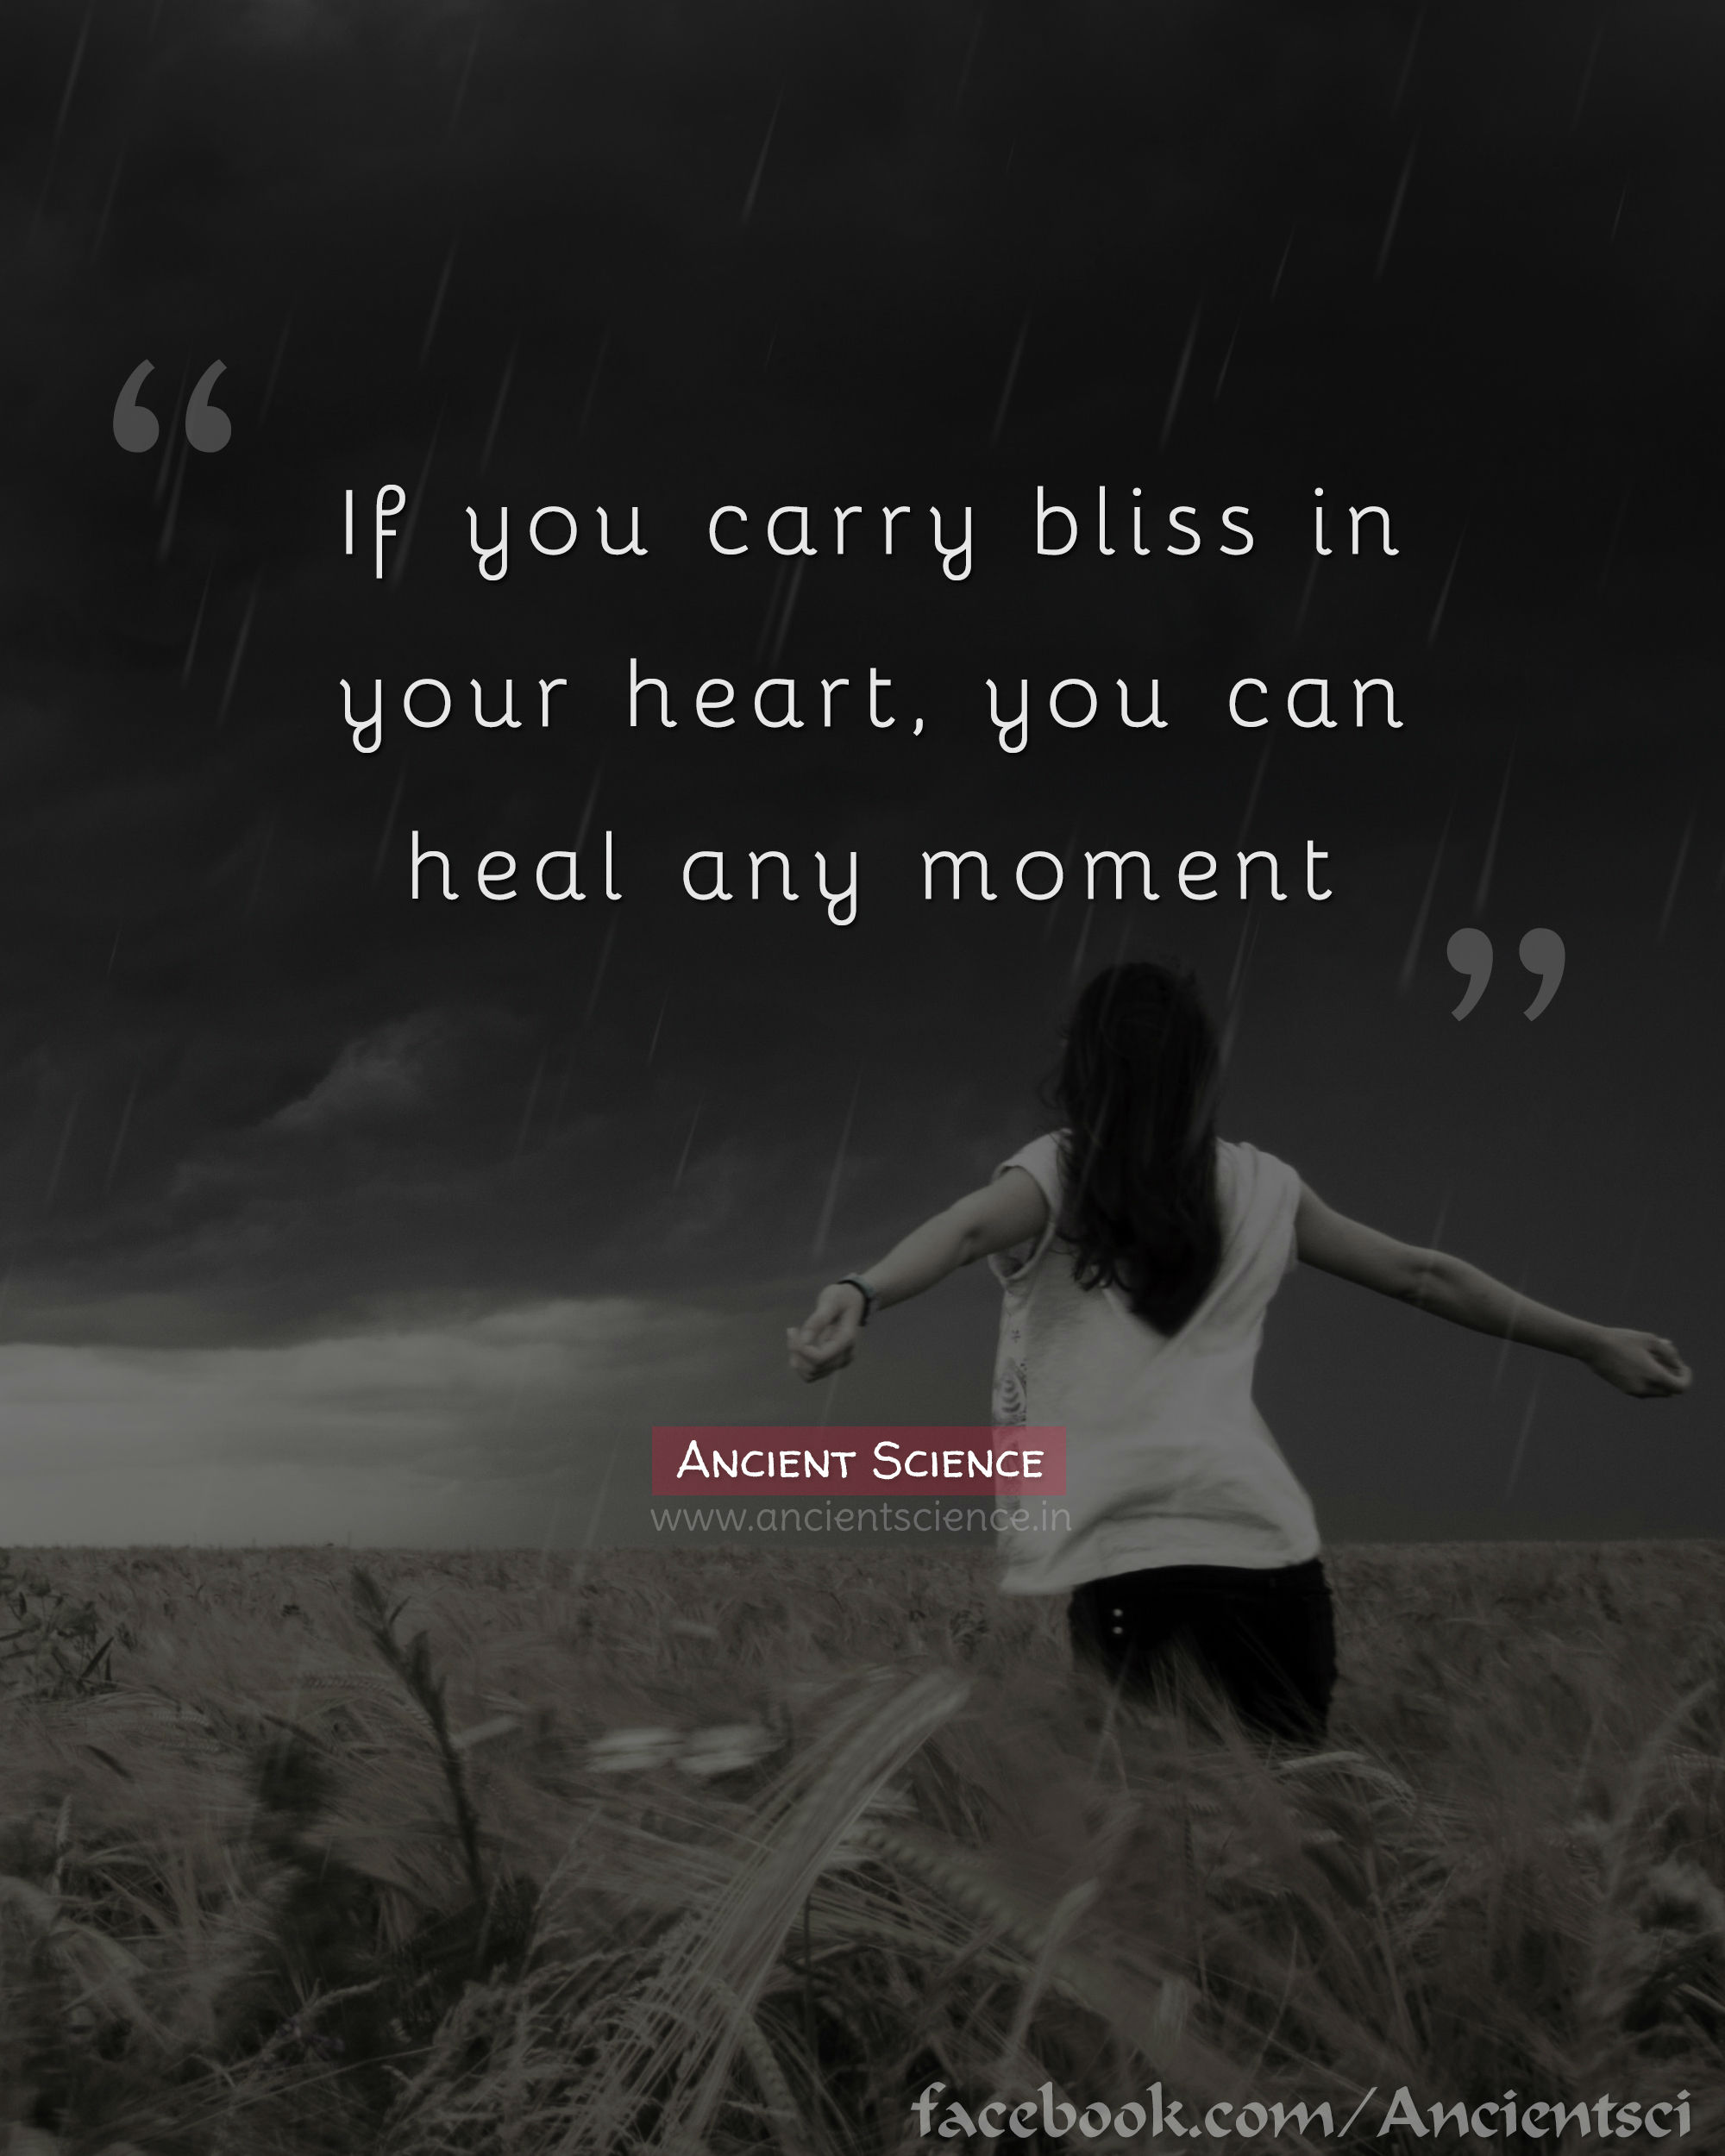 If you carry bliss in your heart, you can heal any moment.